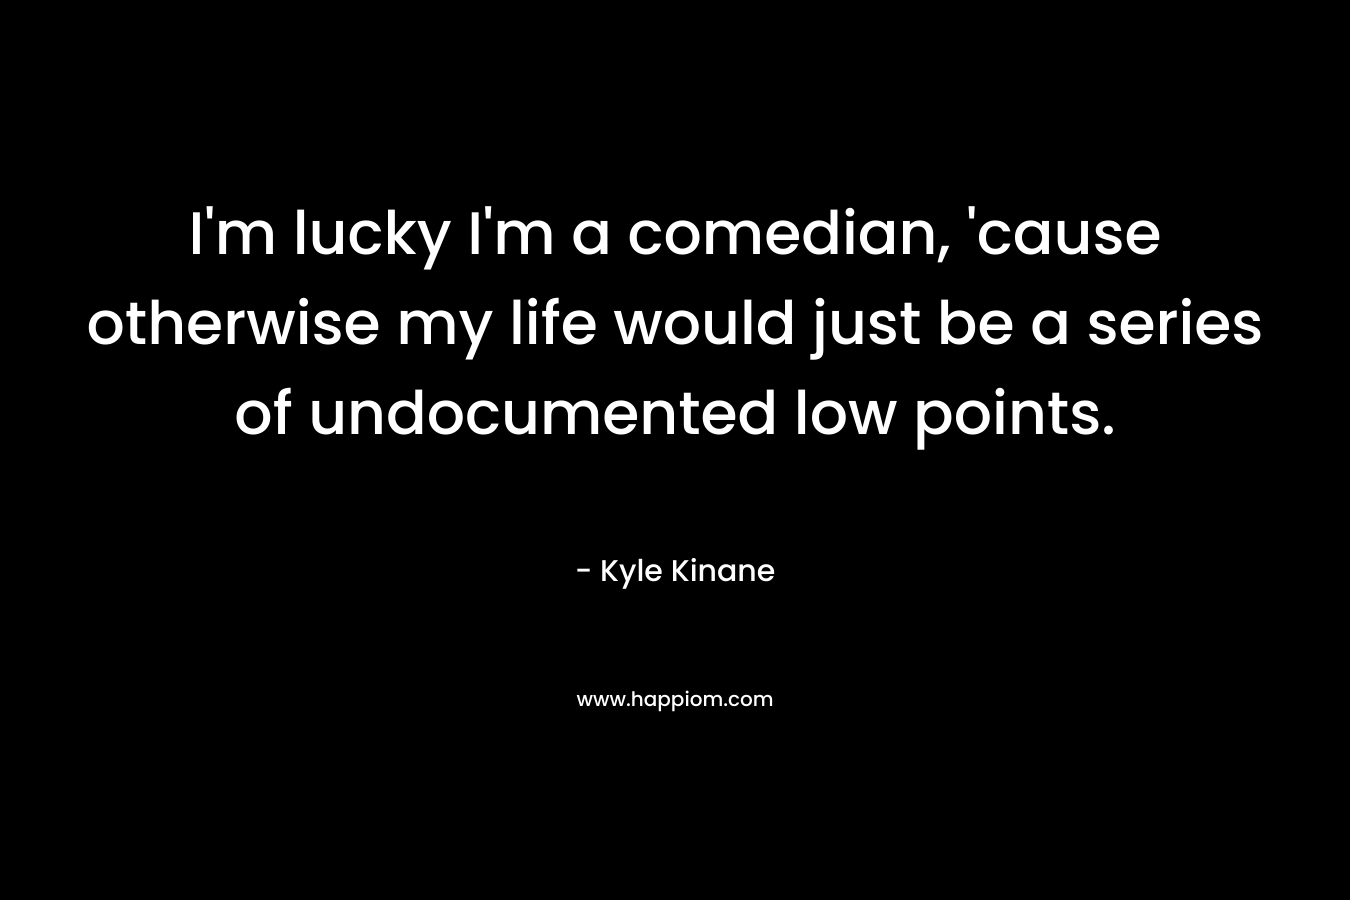 I'm lucky I'm a comedian, 'cause otherwise my life would just be a series of undocumented low points.